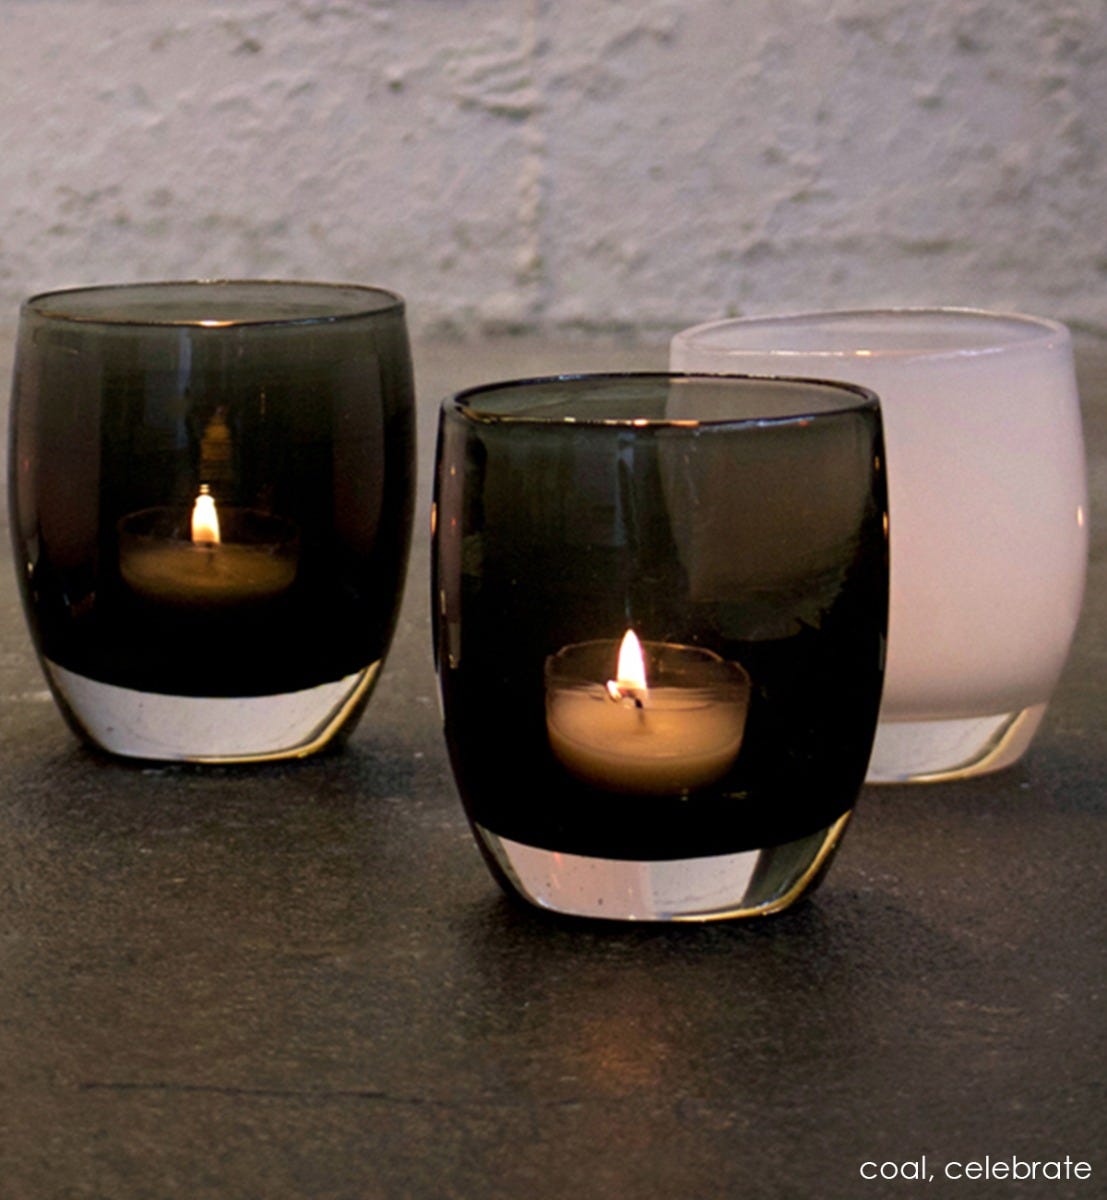 coal transparent black hand-blown glass votive candle holder. Paired with celebrate.